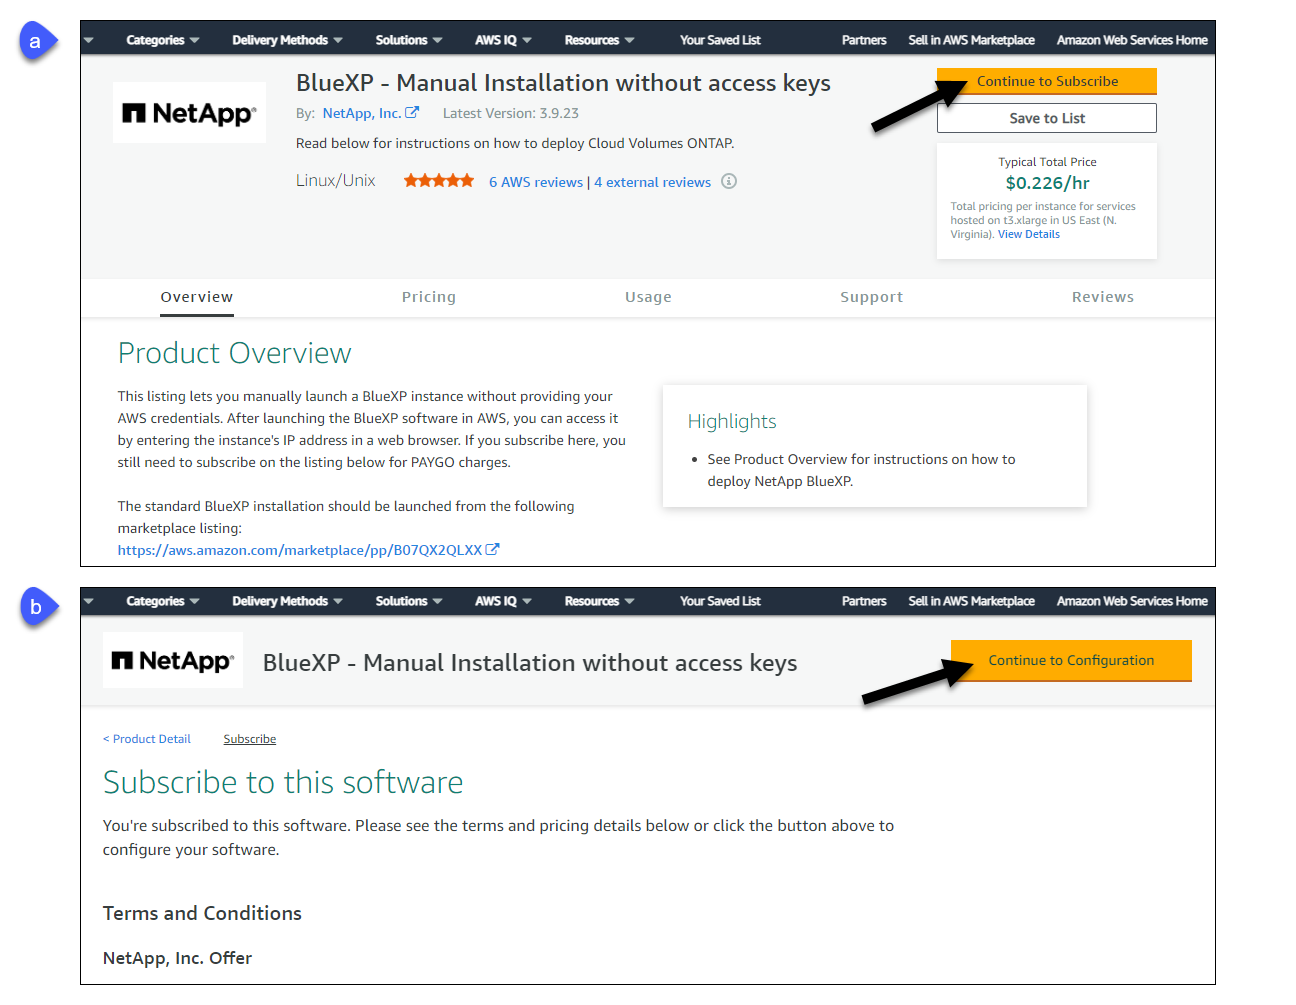 A screenshot that shows the Continue to Subscribe and Continue to Configuration buttons on the AWS Marketplace.